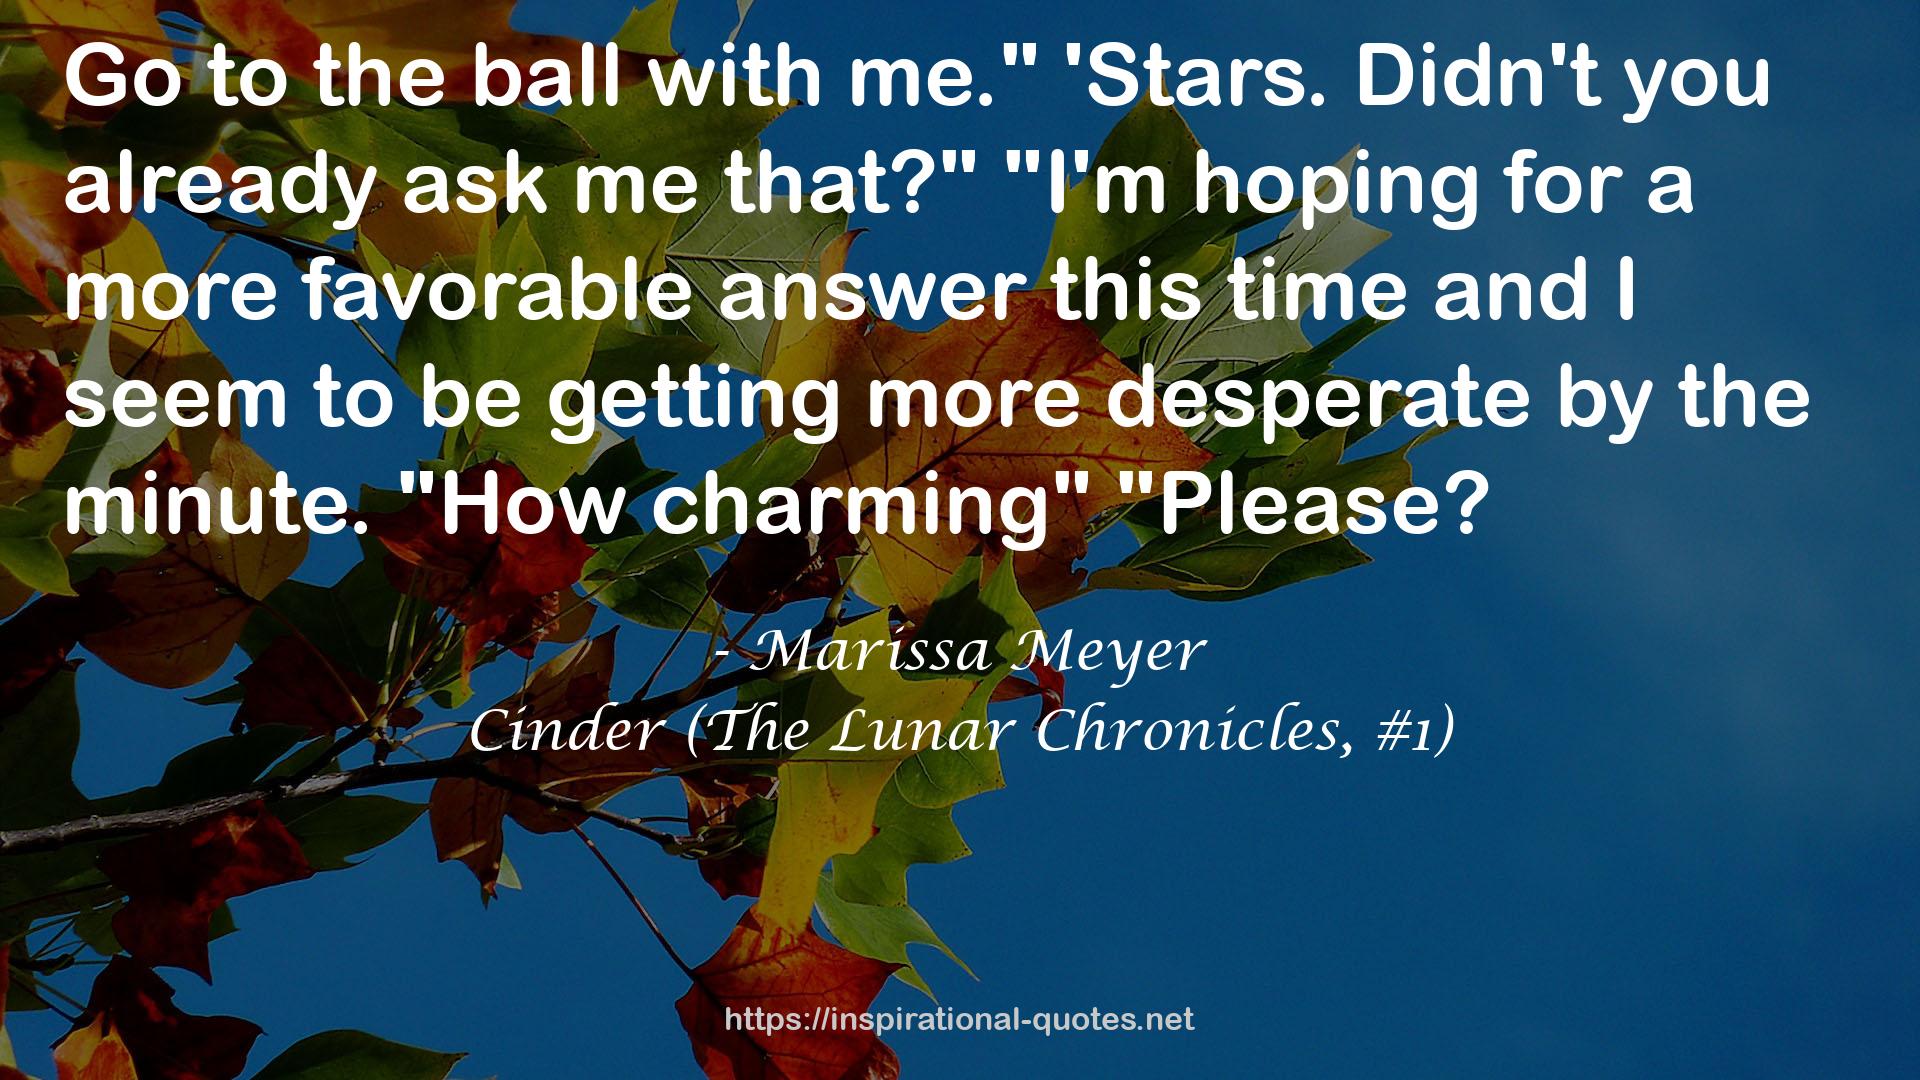 Cinder (The Lunar Chronicles, #1) QUOTES